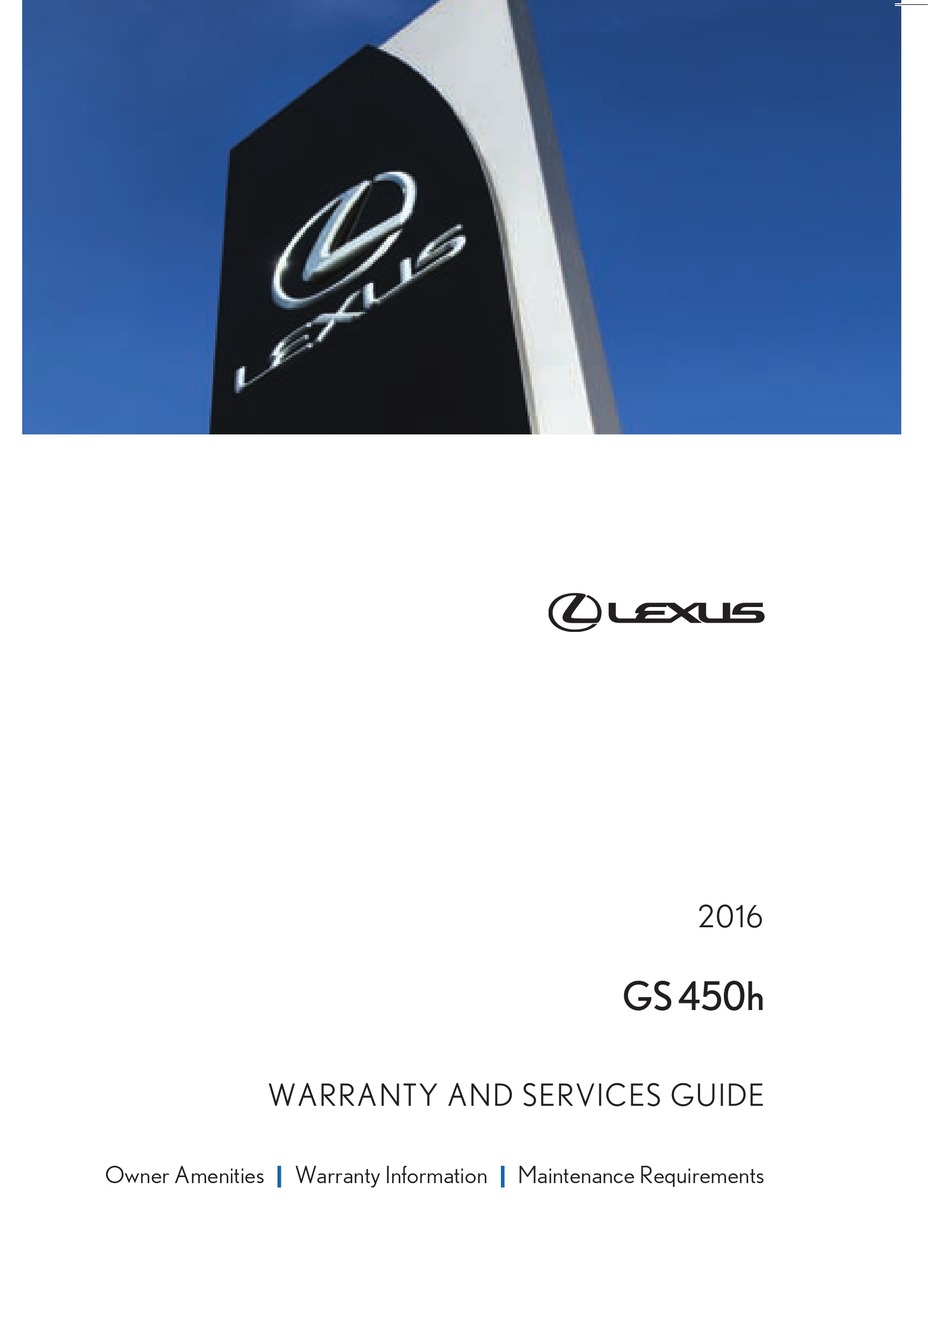 LEXUS GS 450H WARRANTY AND SERVICES MANUAL Pdf Download | ManualsLib